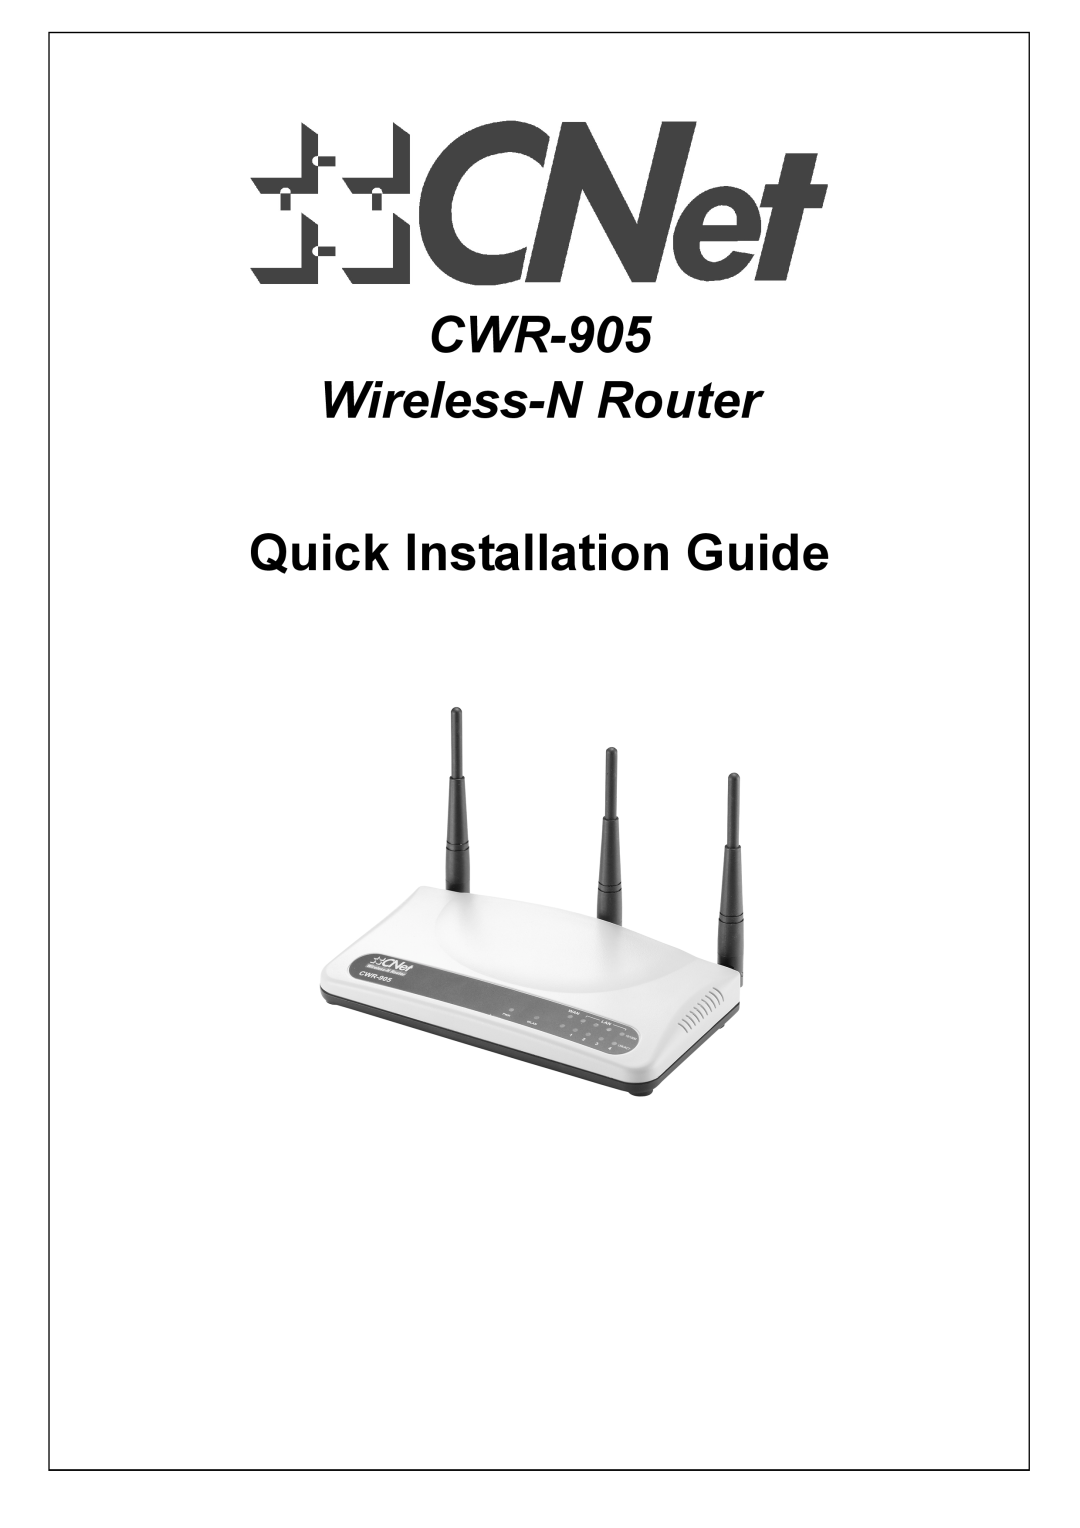 CNET manual CWR-905 Wireless-N Router, Quick Installation Guide 